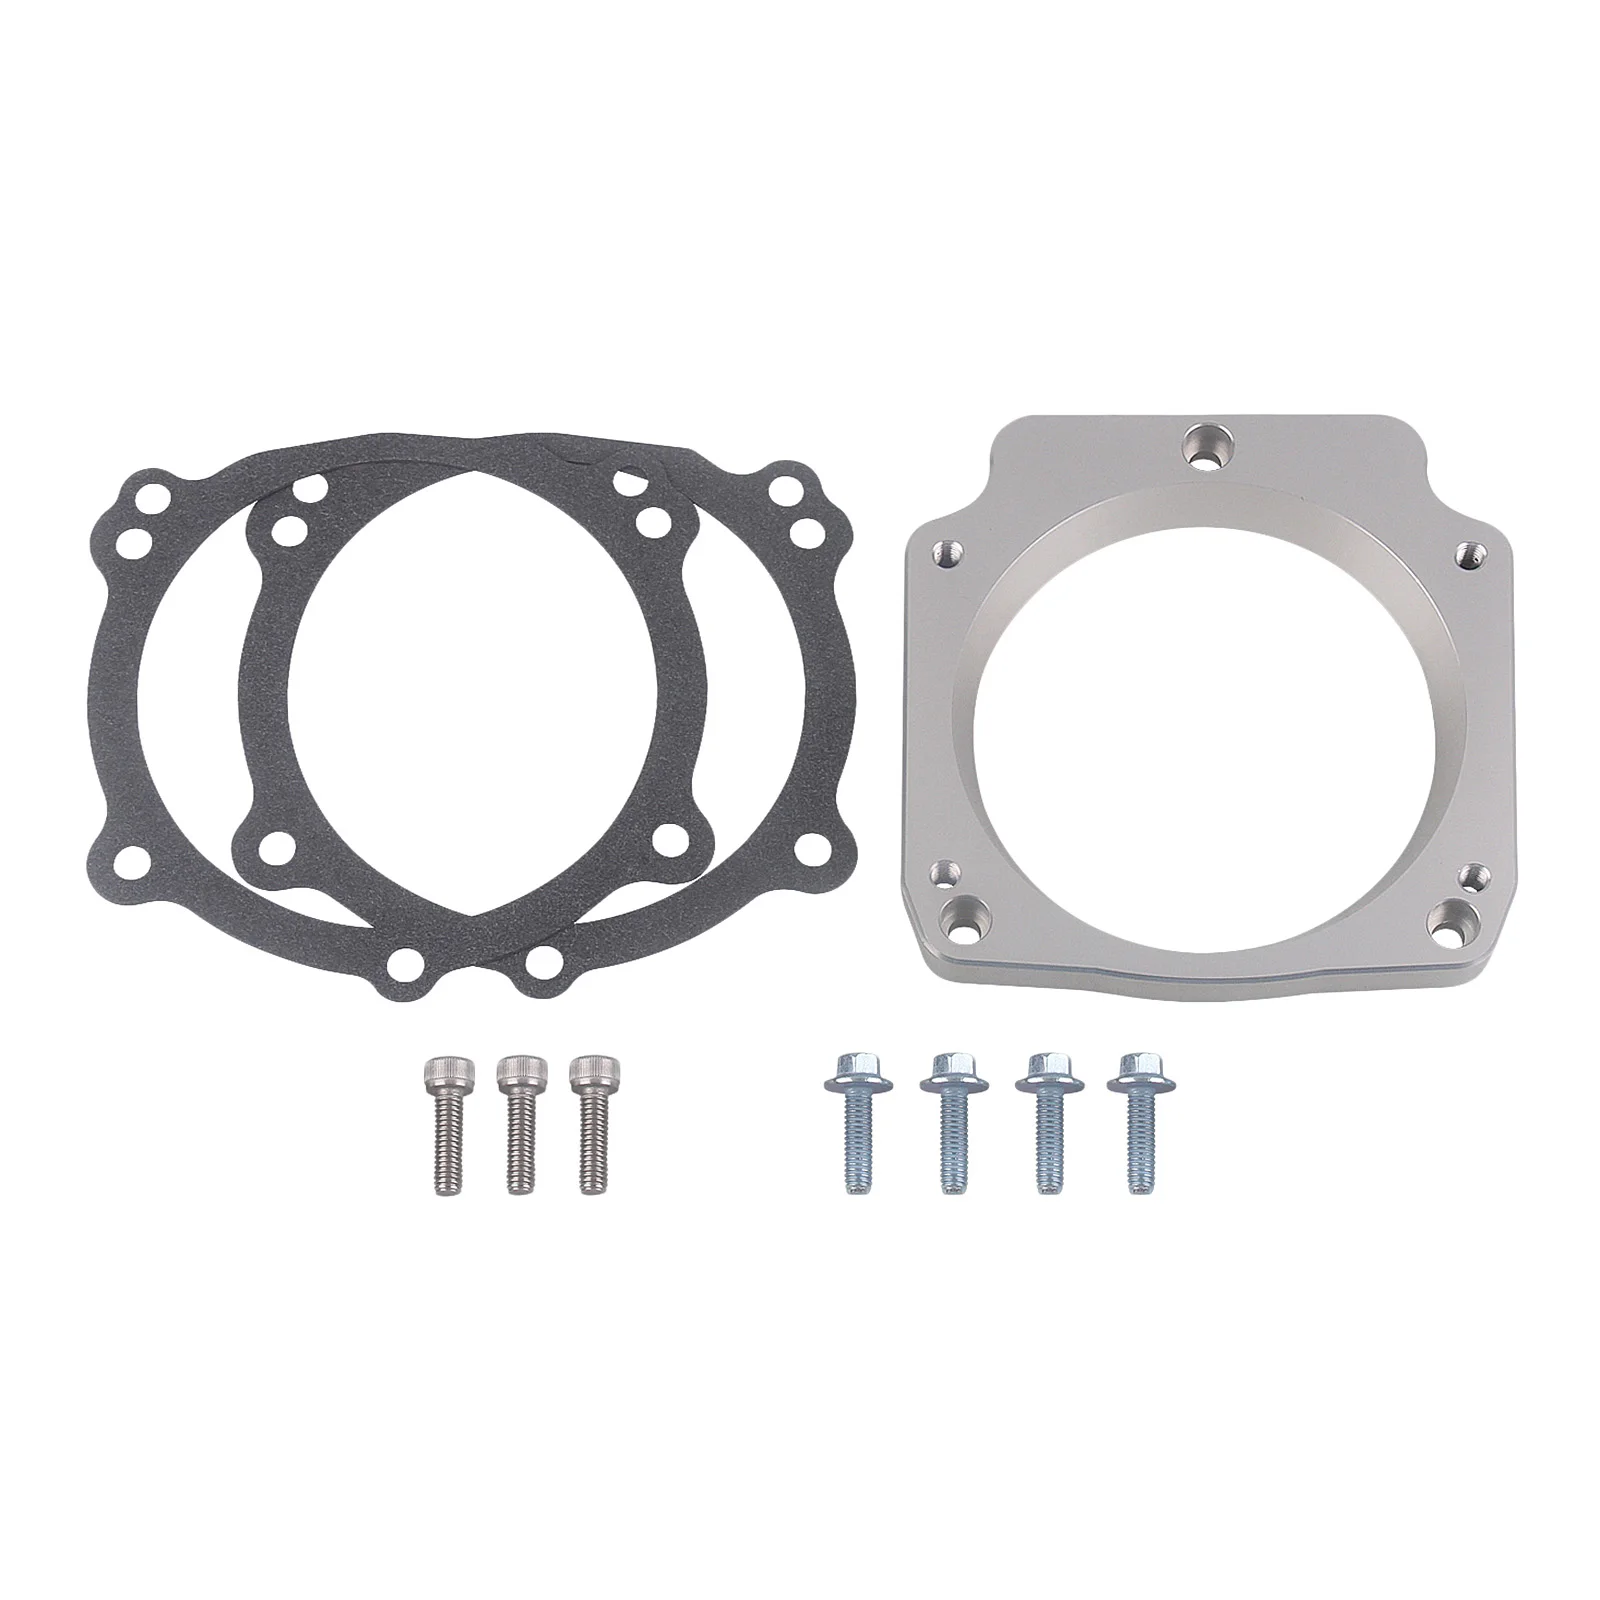 LS 92mm 3 Bolt Intake Manifold to 102mm 4 Bolt Throttle Body Adapter Plate Replacement 551571